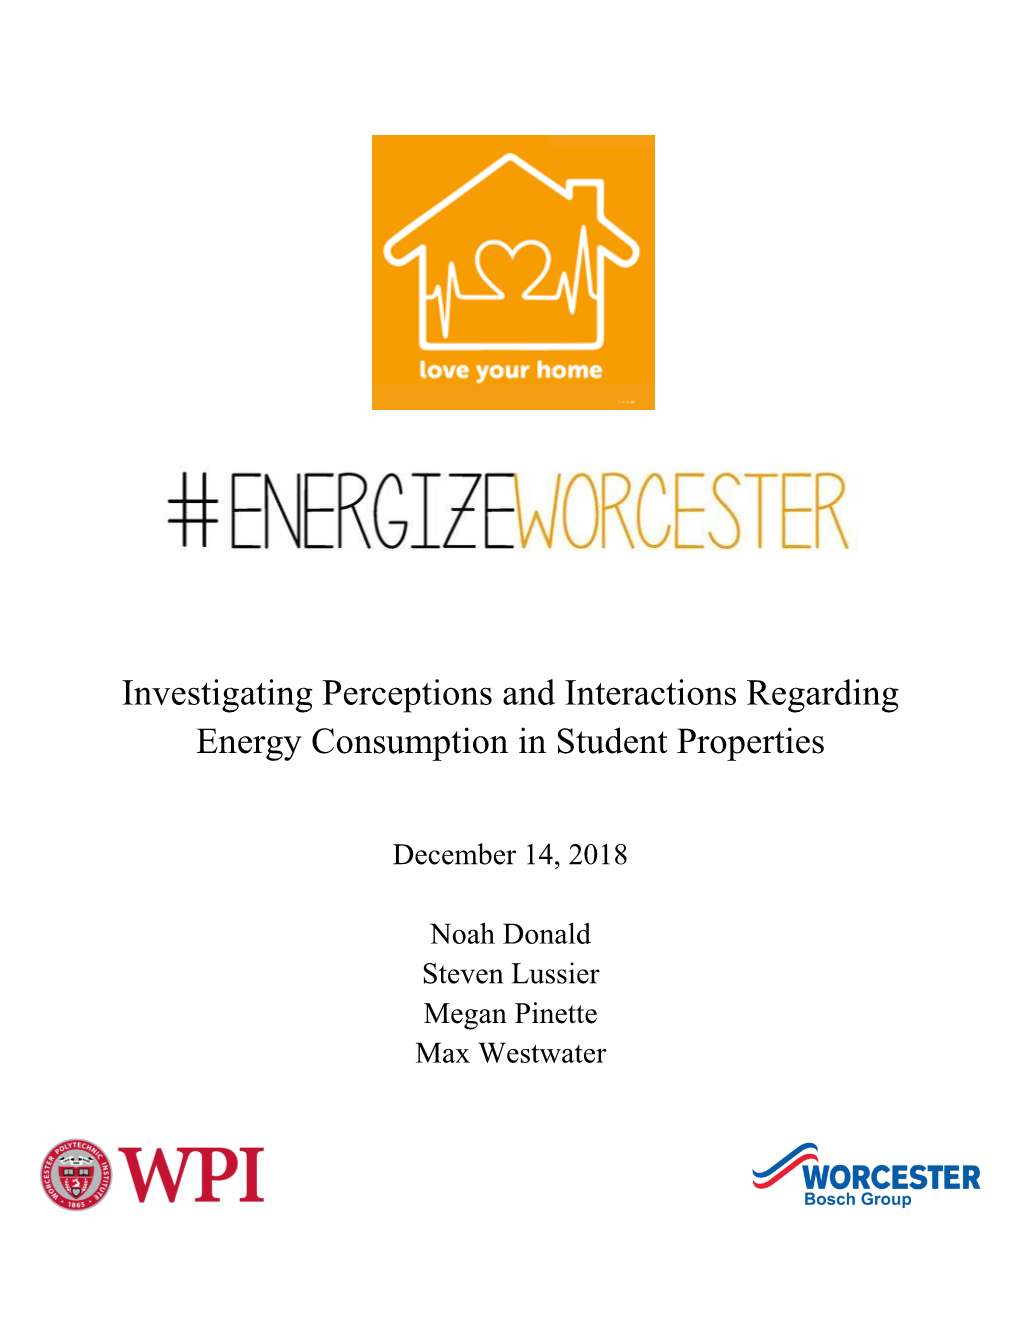 Investigating Perceptions and Interactions Regarding Energy Consumption in Student Properties